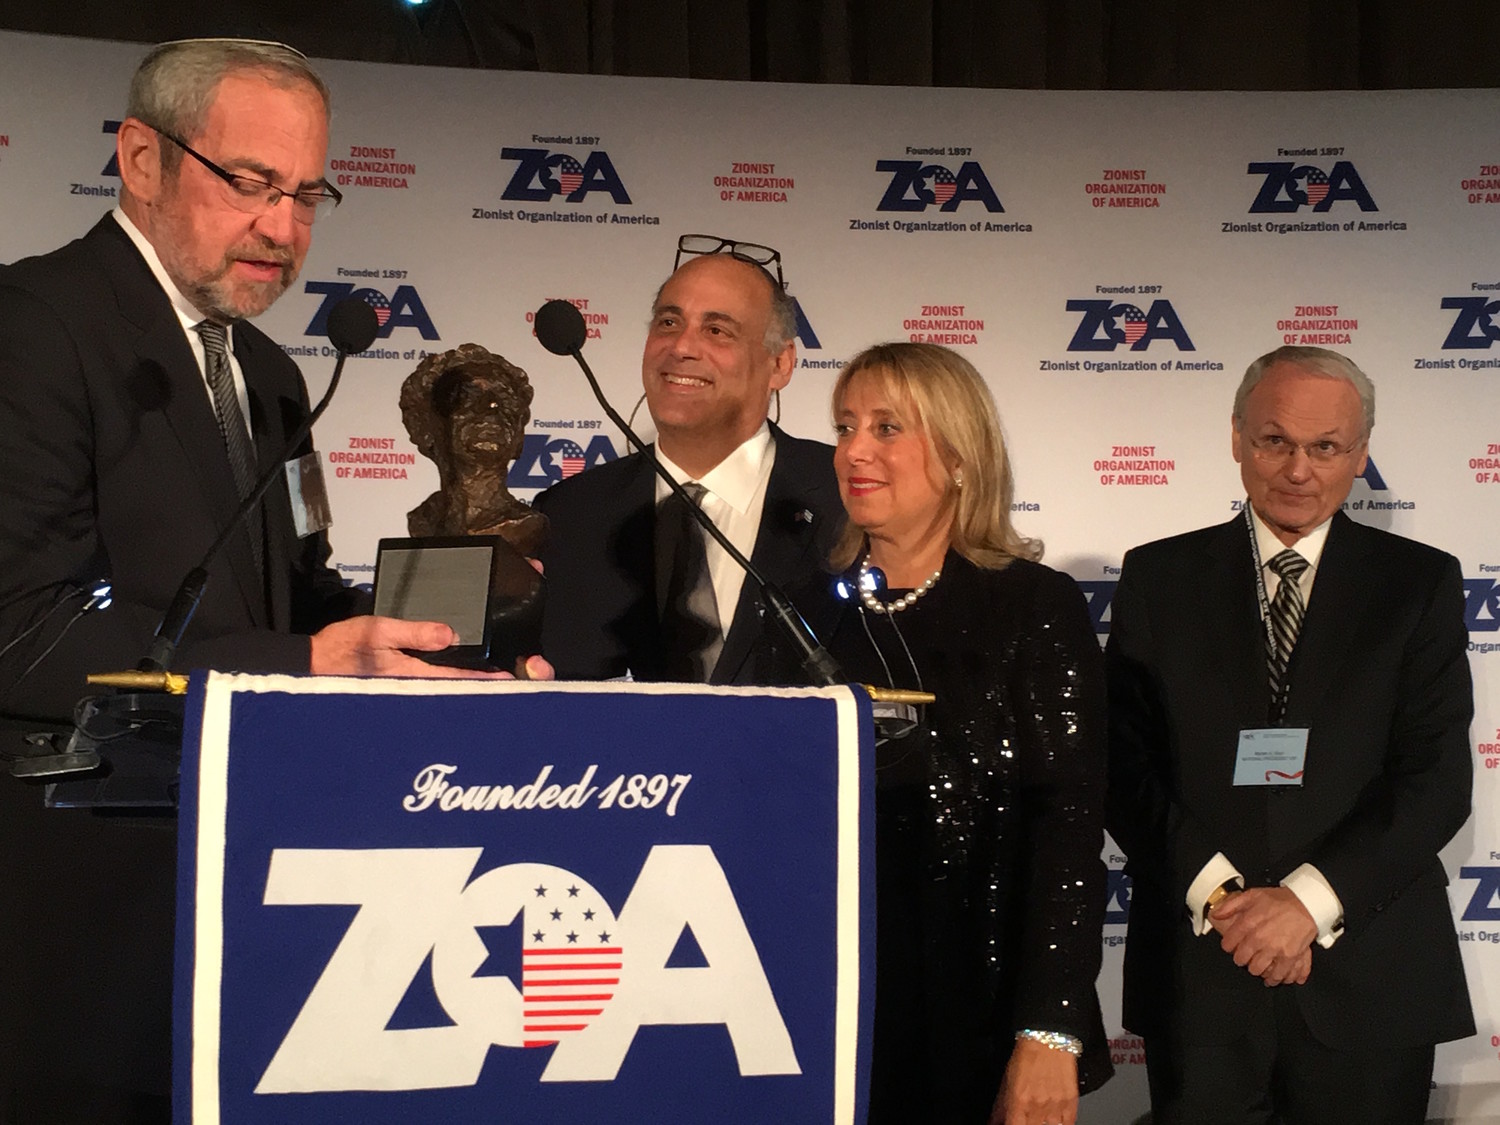 Rabbi Kenneth Hain of Congregation Beth Sholom in Lawrence presents the Louis D. Brandeis award to Shalom and Iris Maidenbaum at Sunday night’s ZOA gala, as ZOA President Morton Klein looks on.